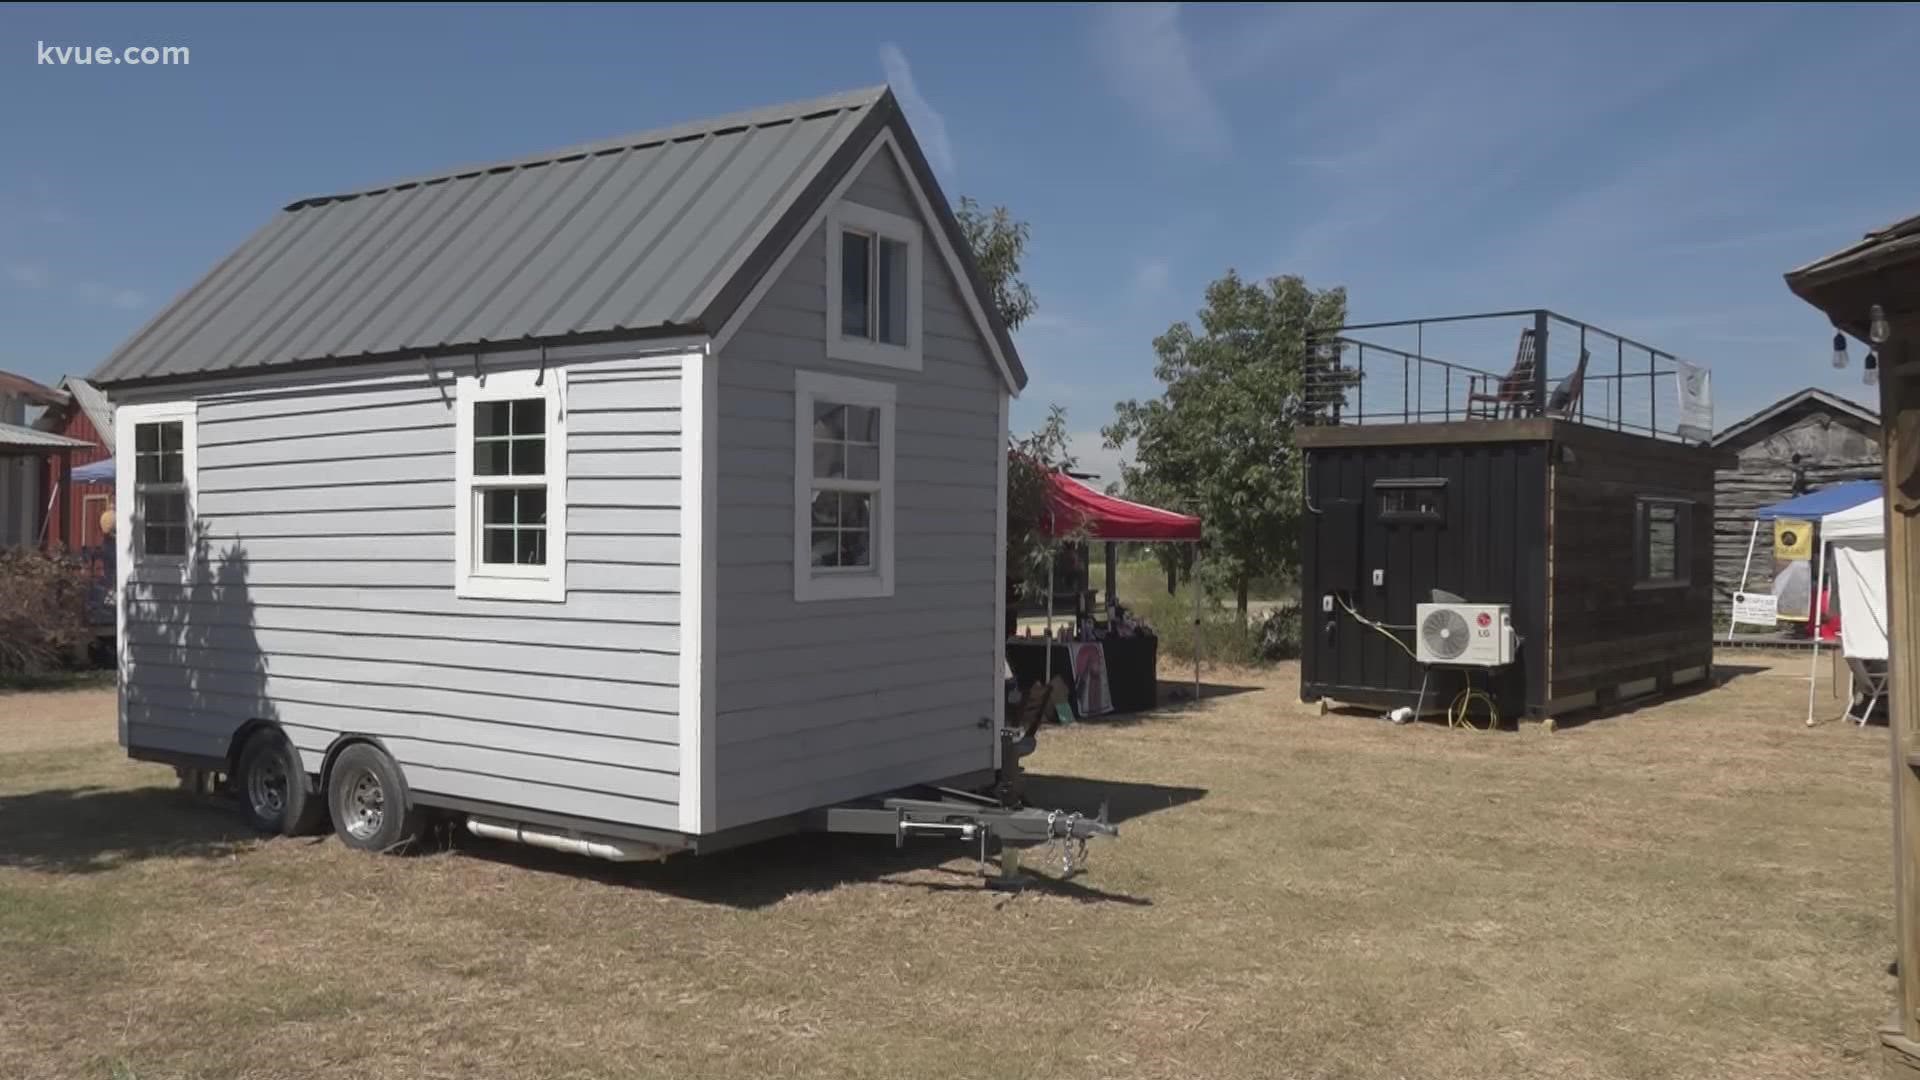 More people in Central Texas are looking for a lower cost of living and a simpler way of life.